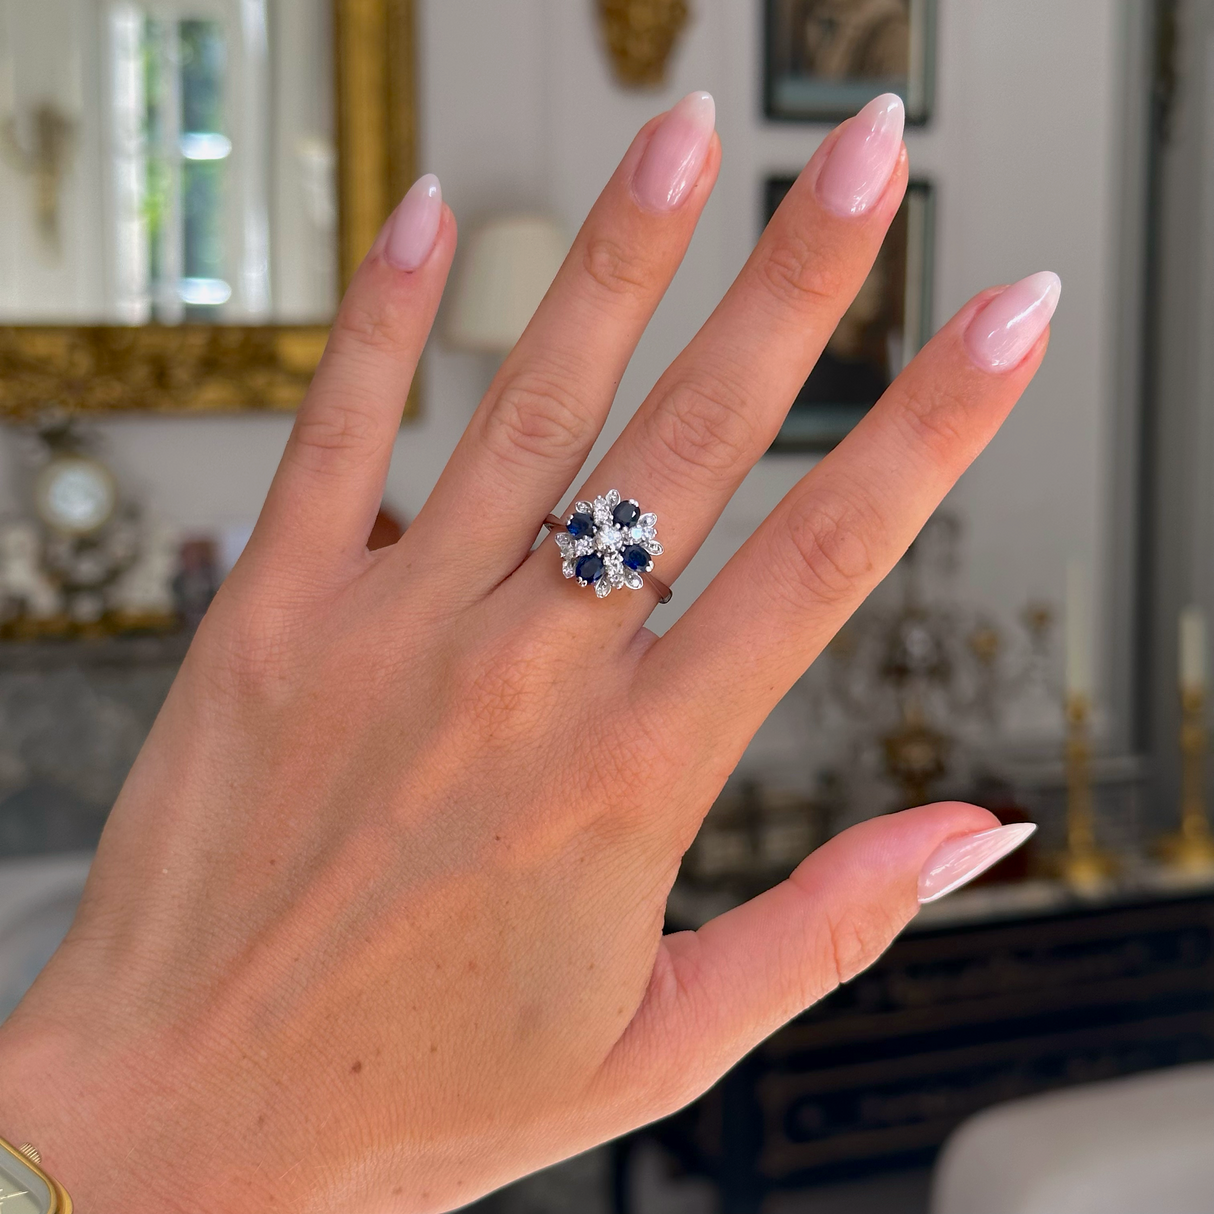 Sapphire and diamond cluster ring from 80s, worn on hand, front view. 